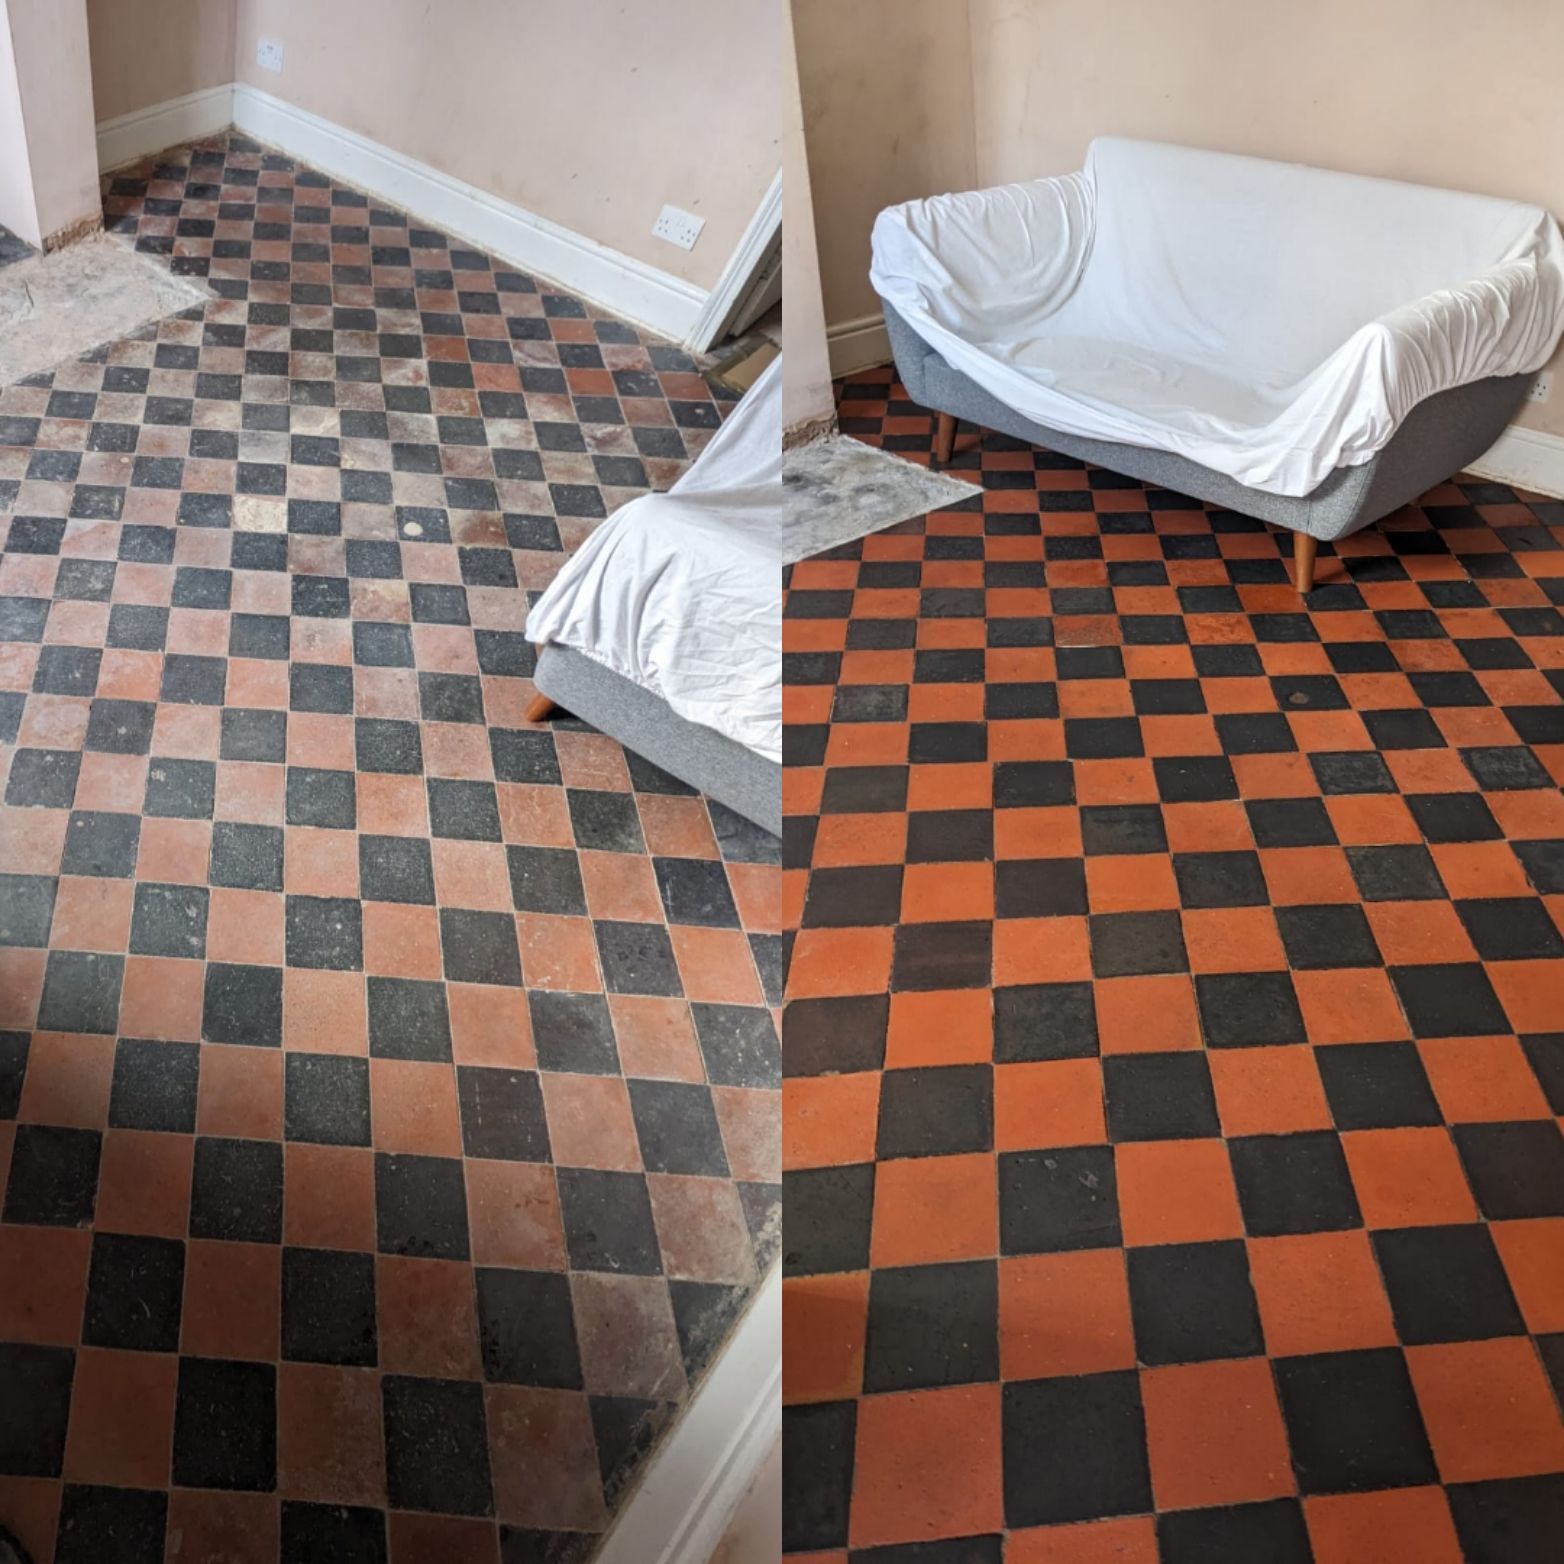 Deep cleaning, sealing and restoring a quarry tiled floor in Stockport, Greater Manchester